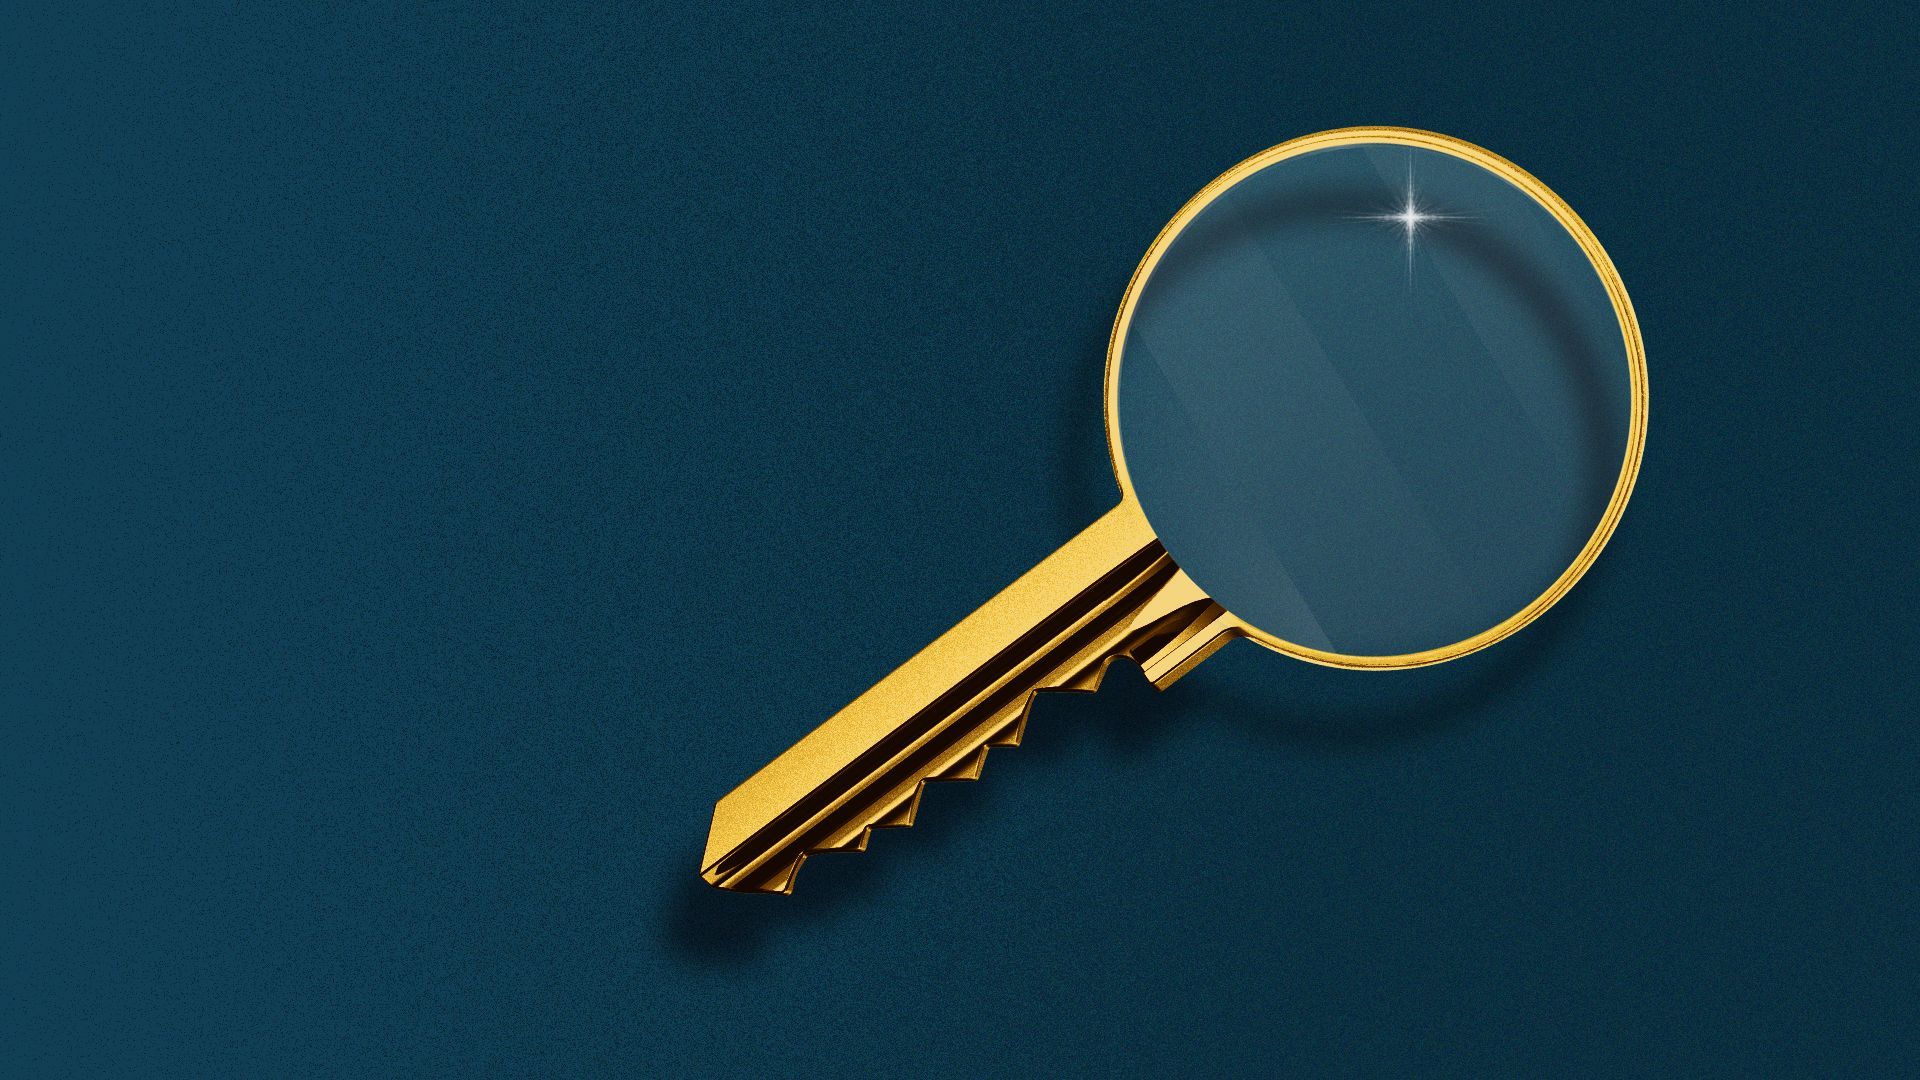 Illustration of a magnifying glass with a key for the handle.